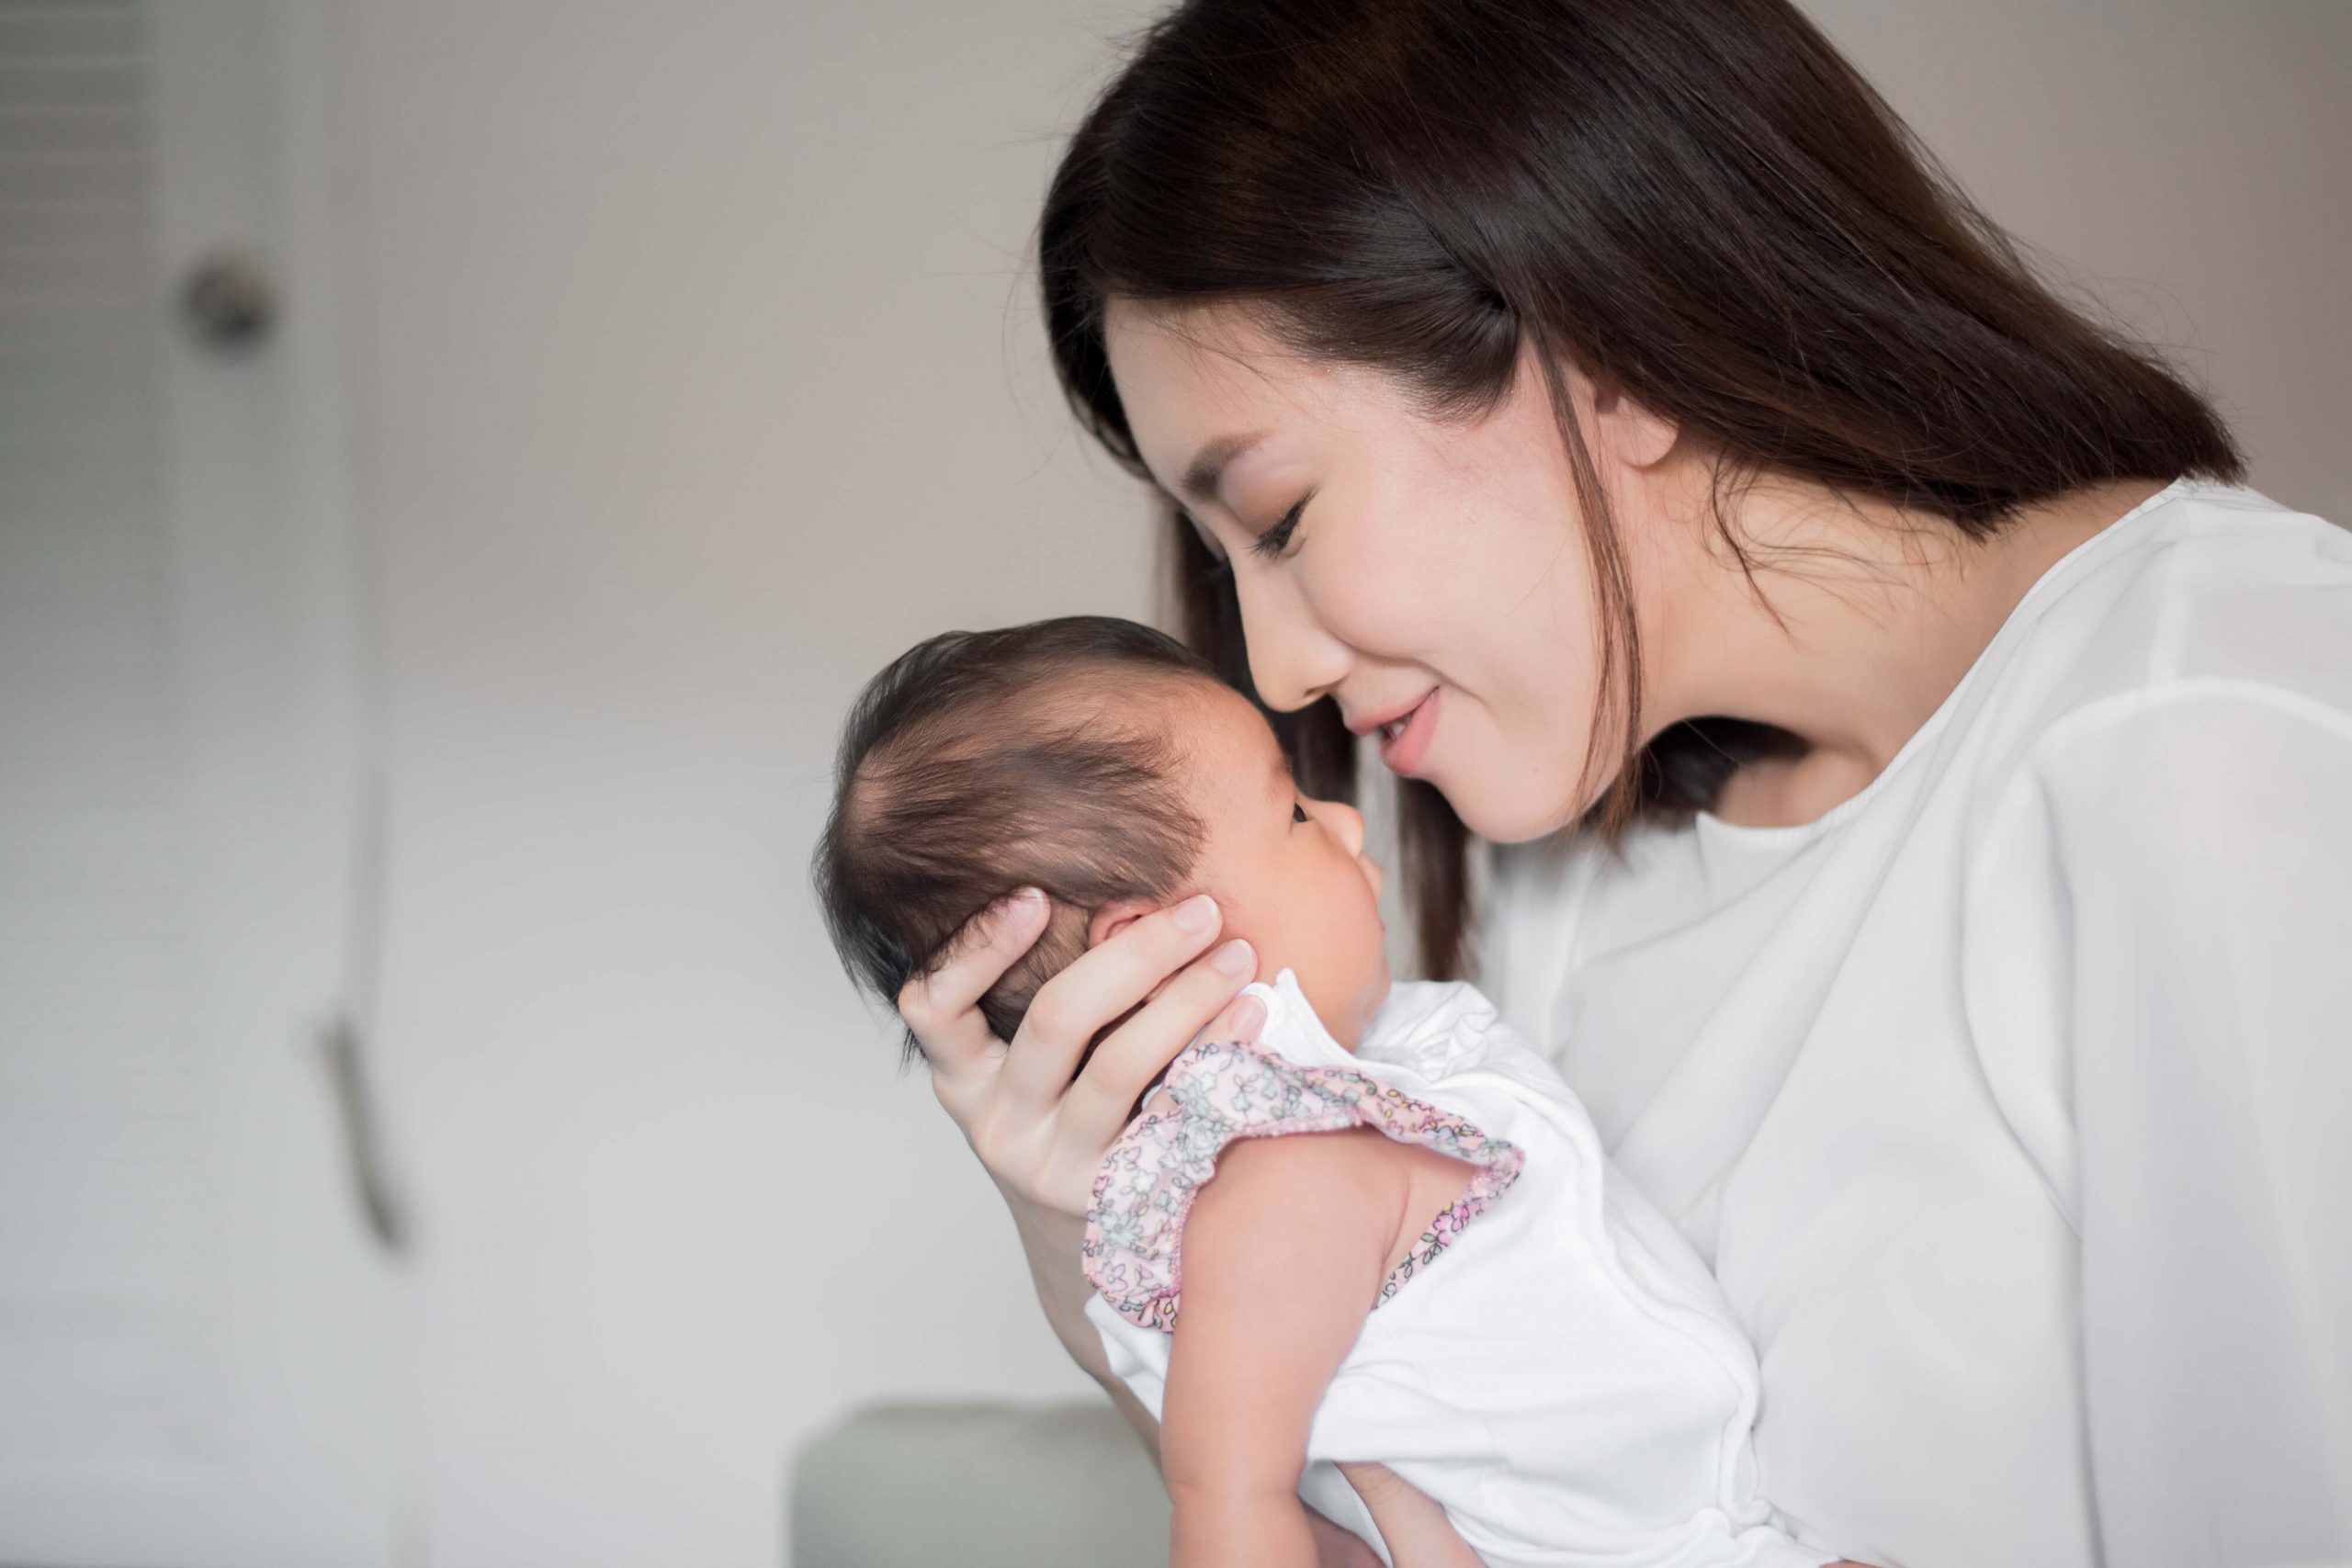 Breast Engorgement: Causes and Tips for Relief